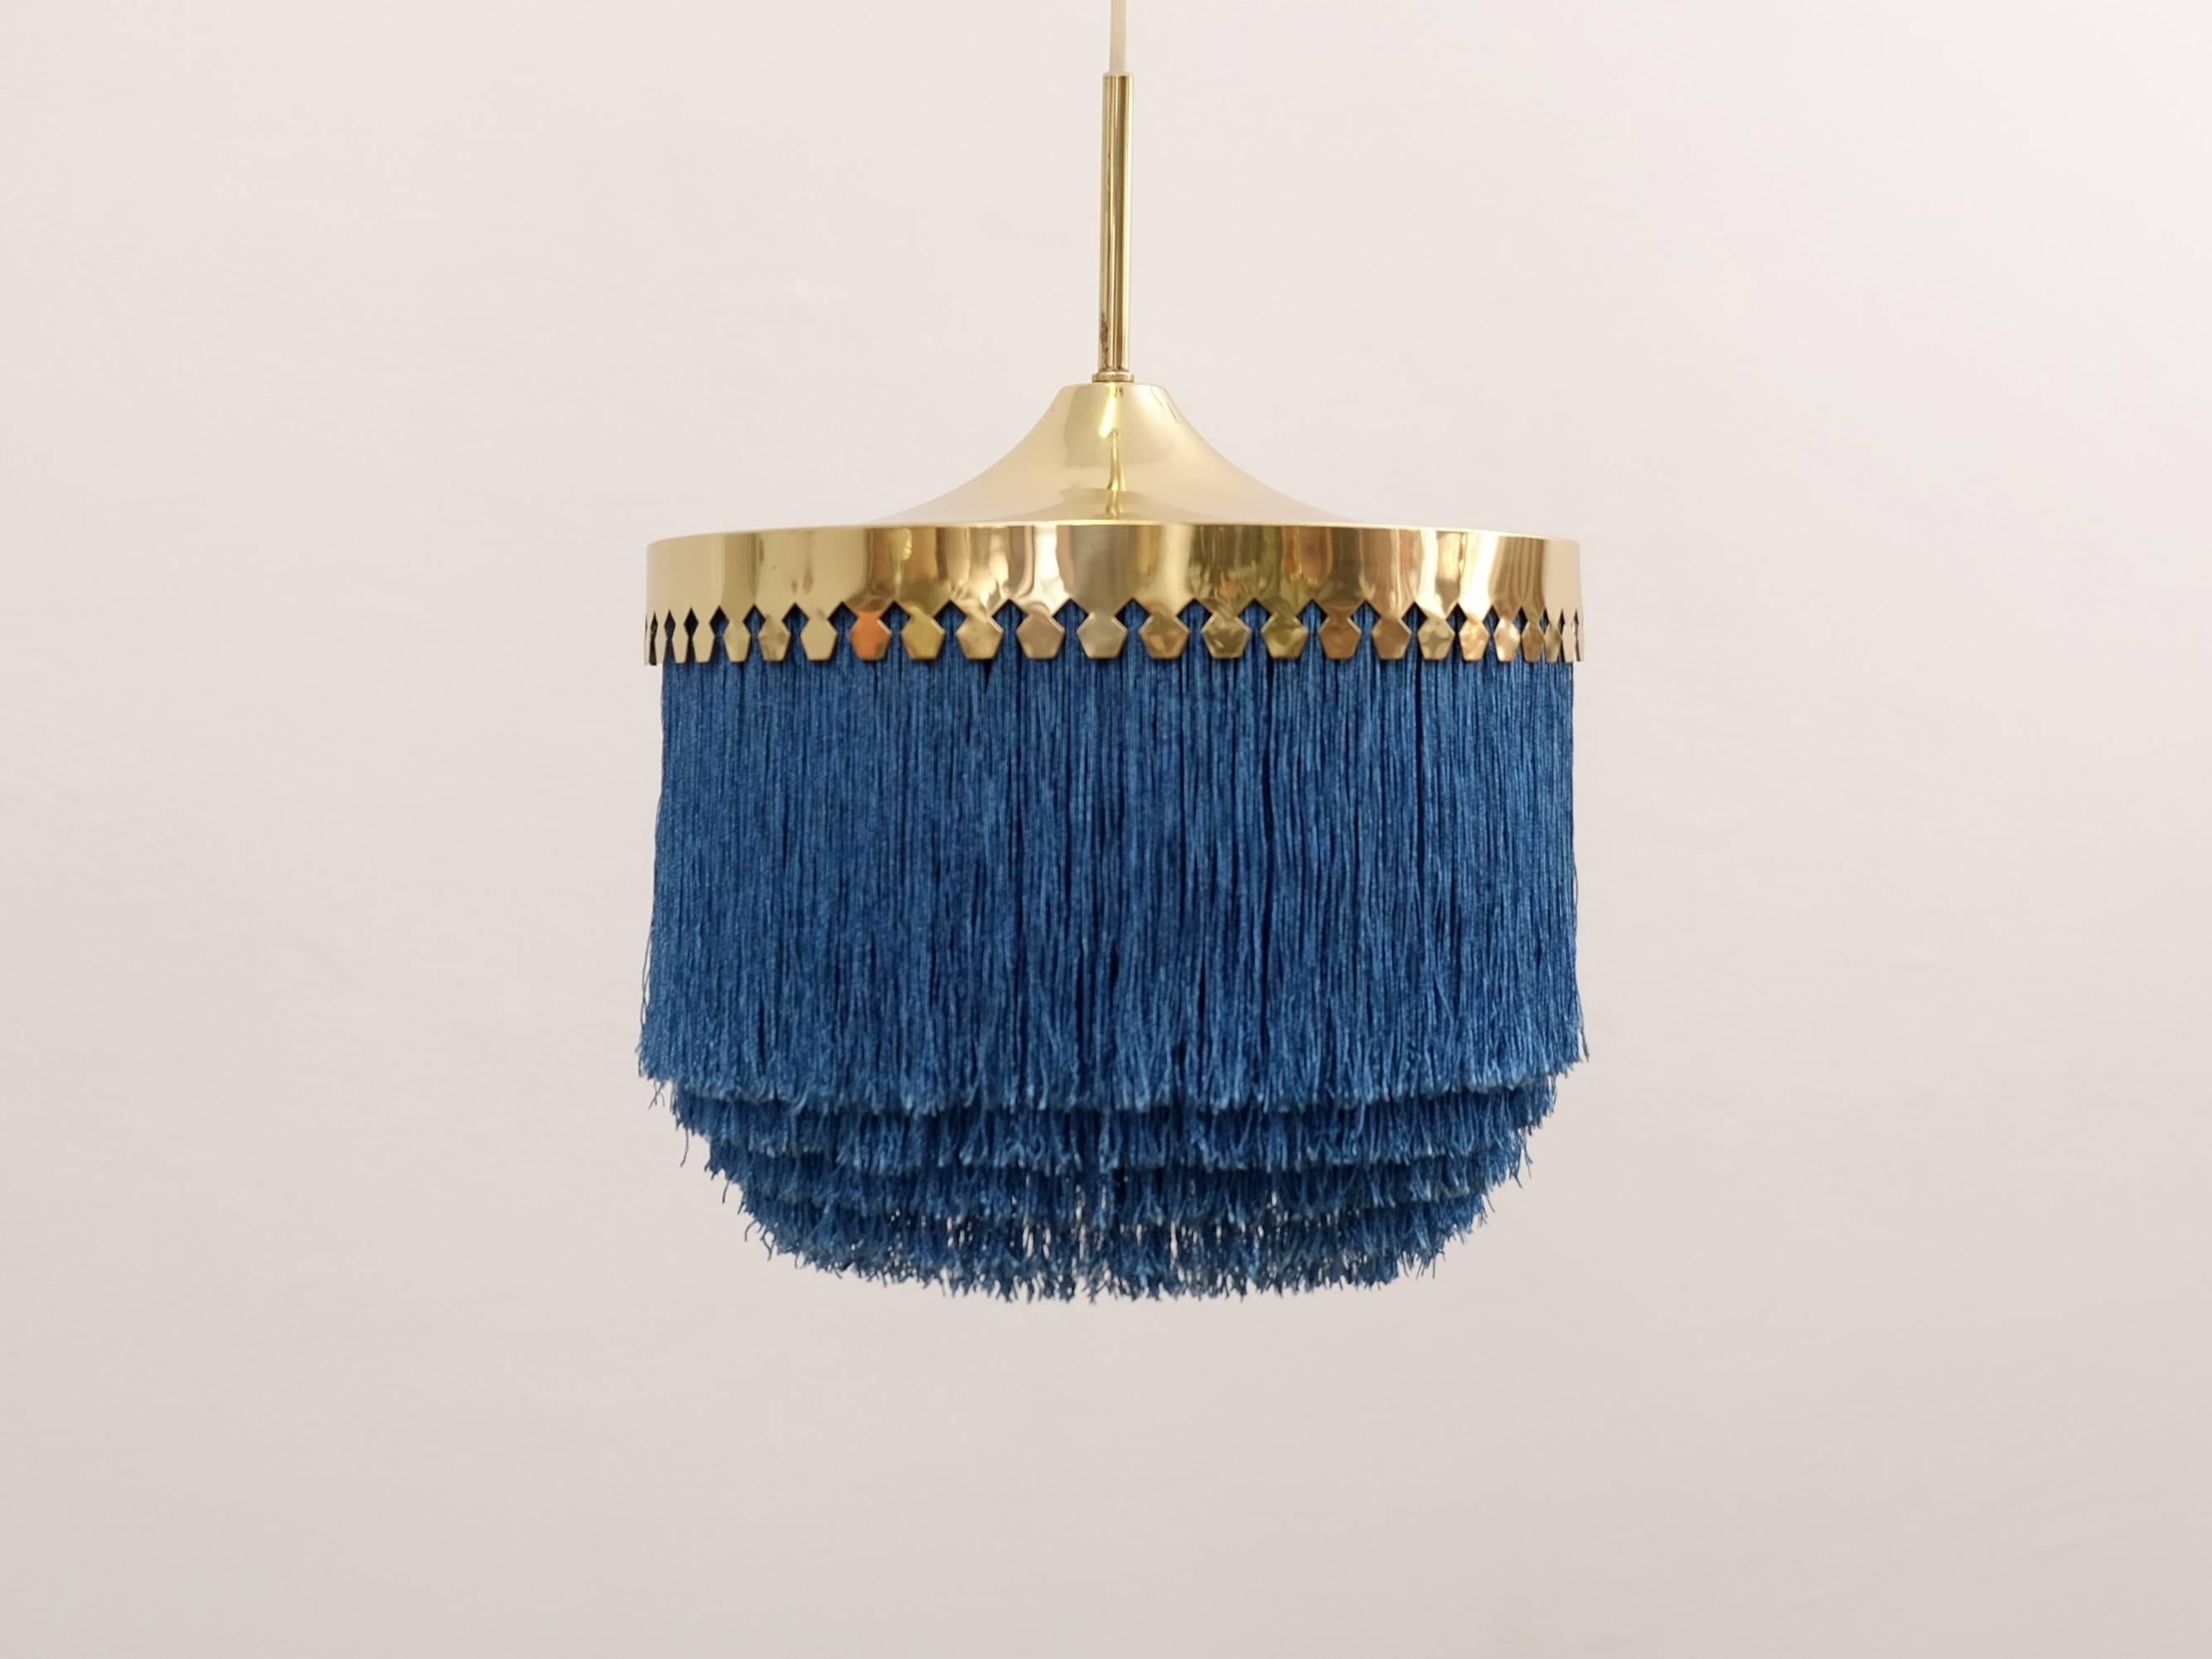 Blue fringes and brass.
Produced by Hans-Agne Jakobsson, Markaryd, Sweden, 1960s.
Height is adjustable.